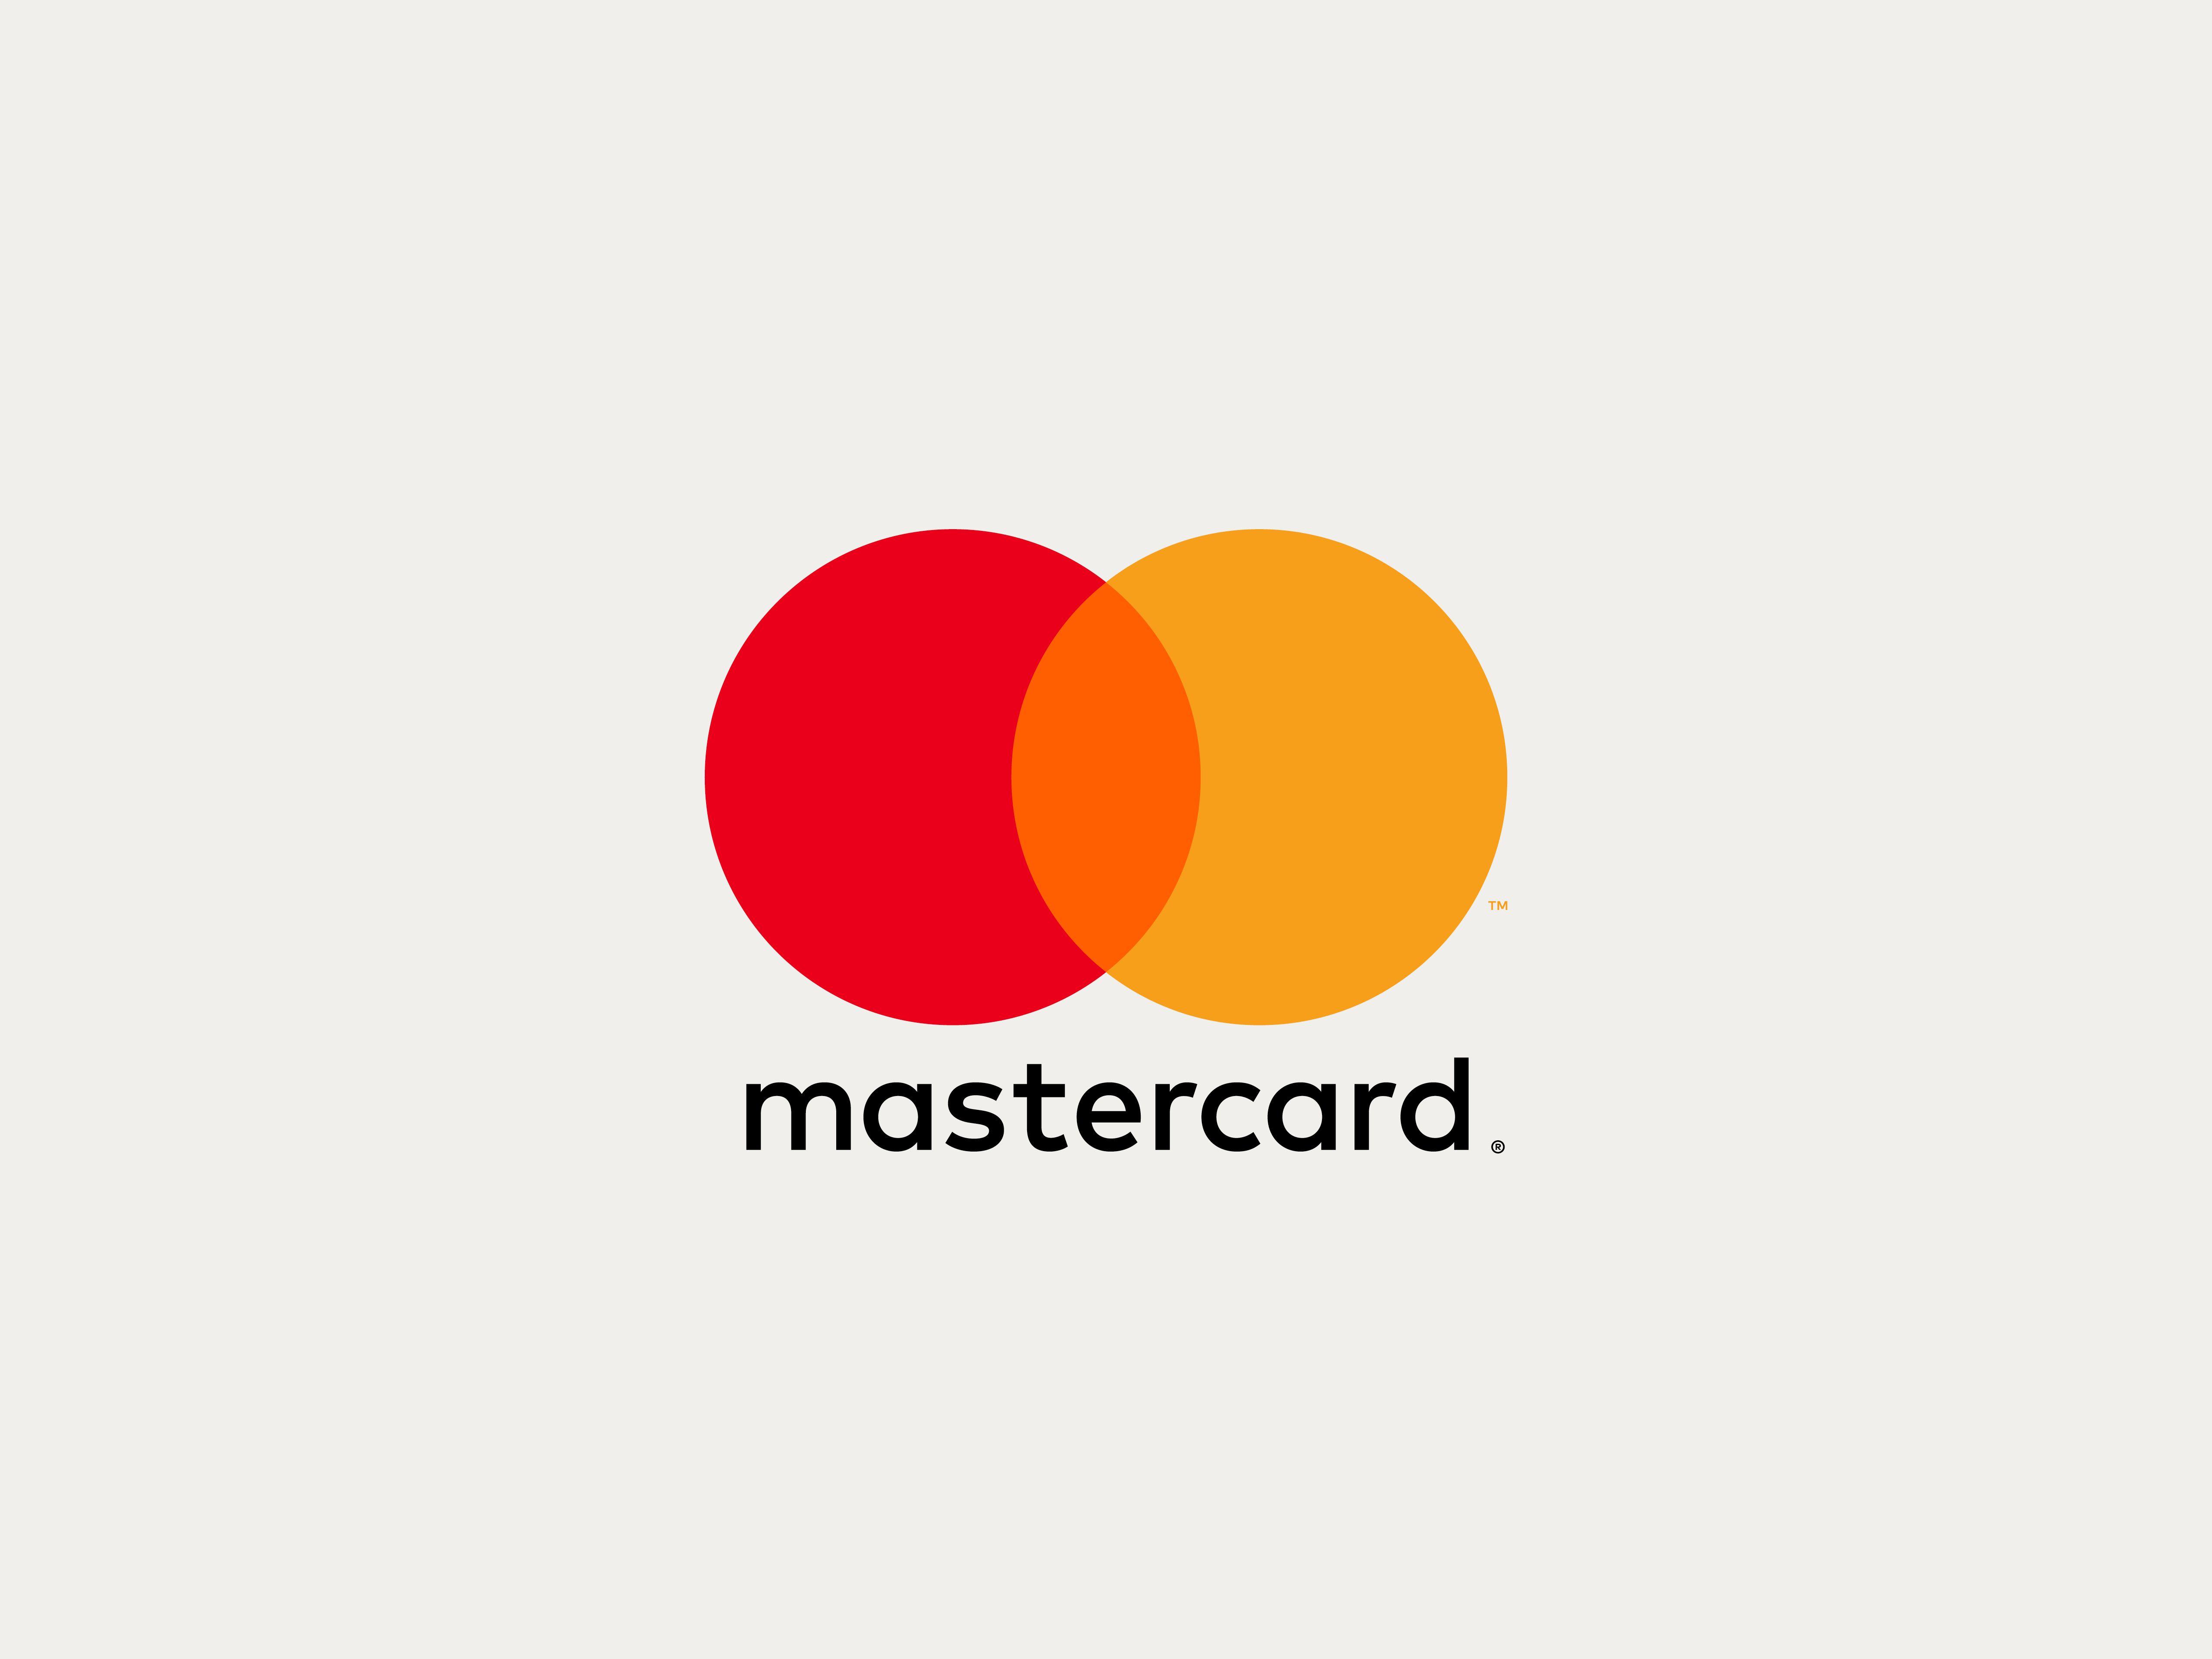 MasterCard Logo - Mastercard reveals new logo for the first time in 20 years – Design Week